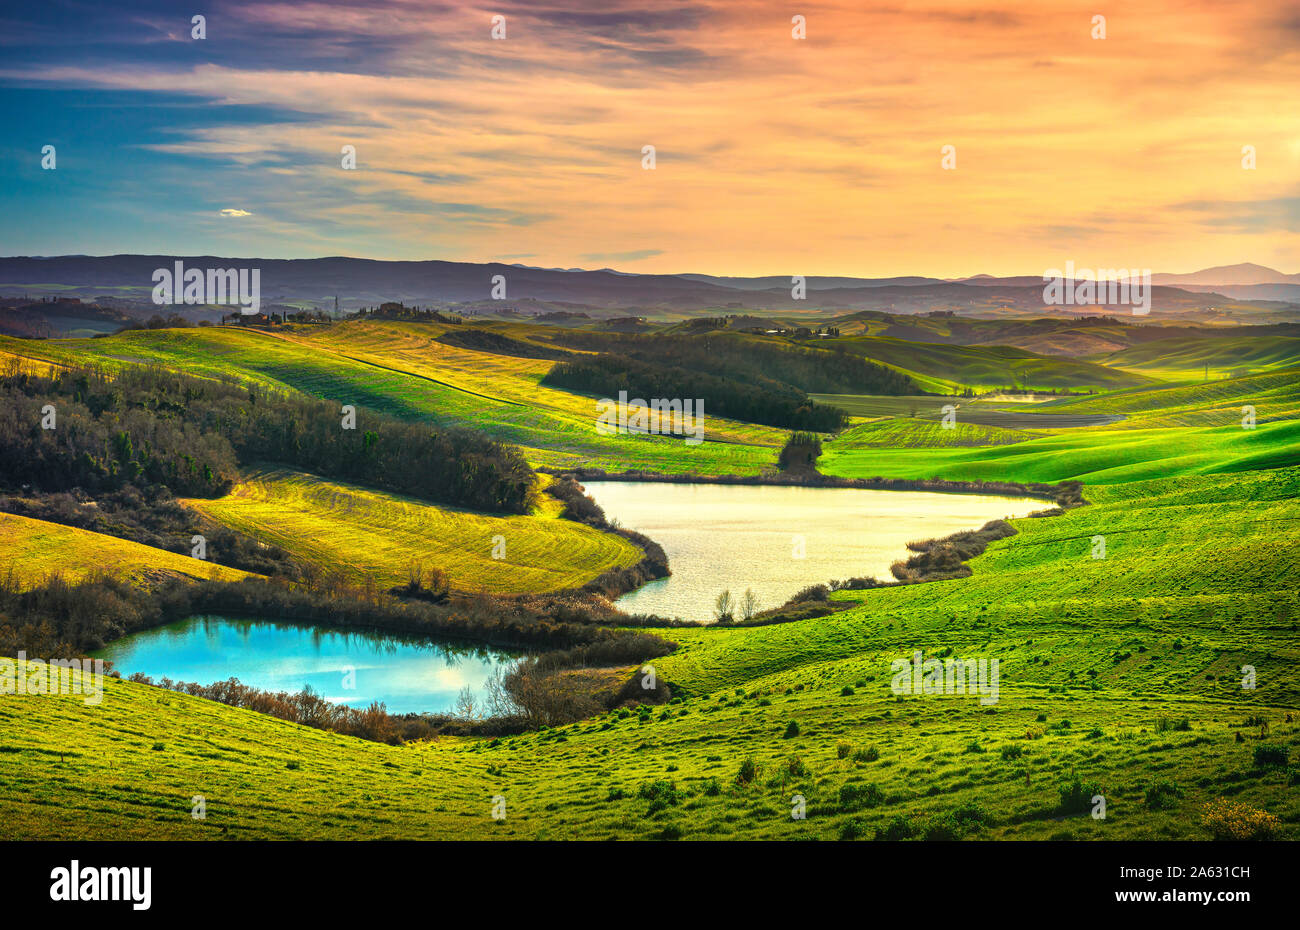 Tuscany landscape, small lakes, green and yellow fields in Crete Senesi. Italy, Europe. Stock Photo